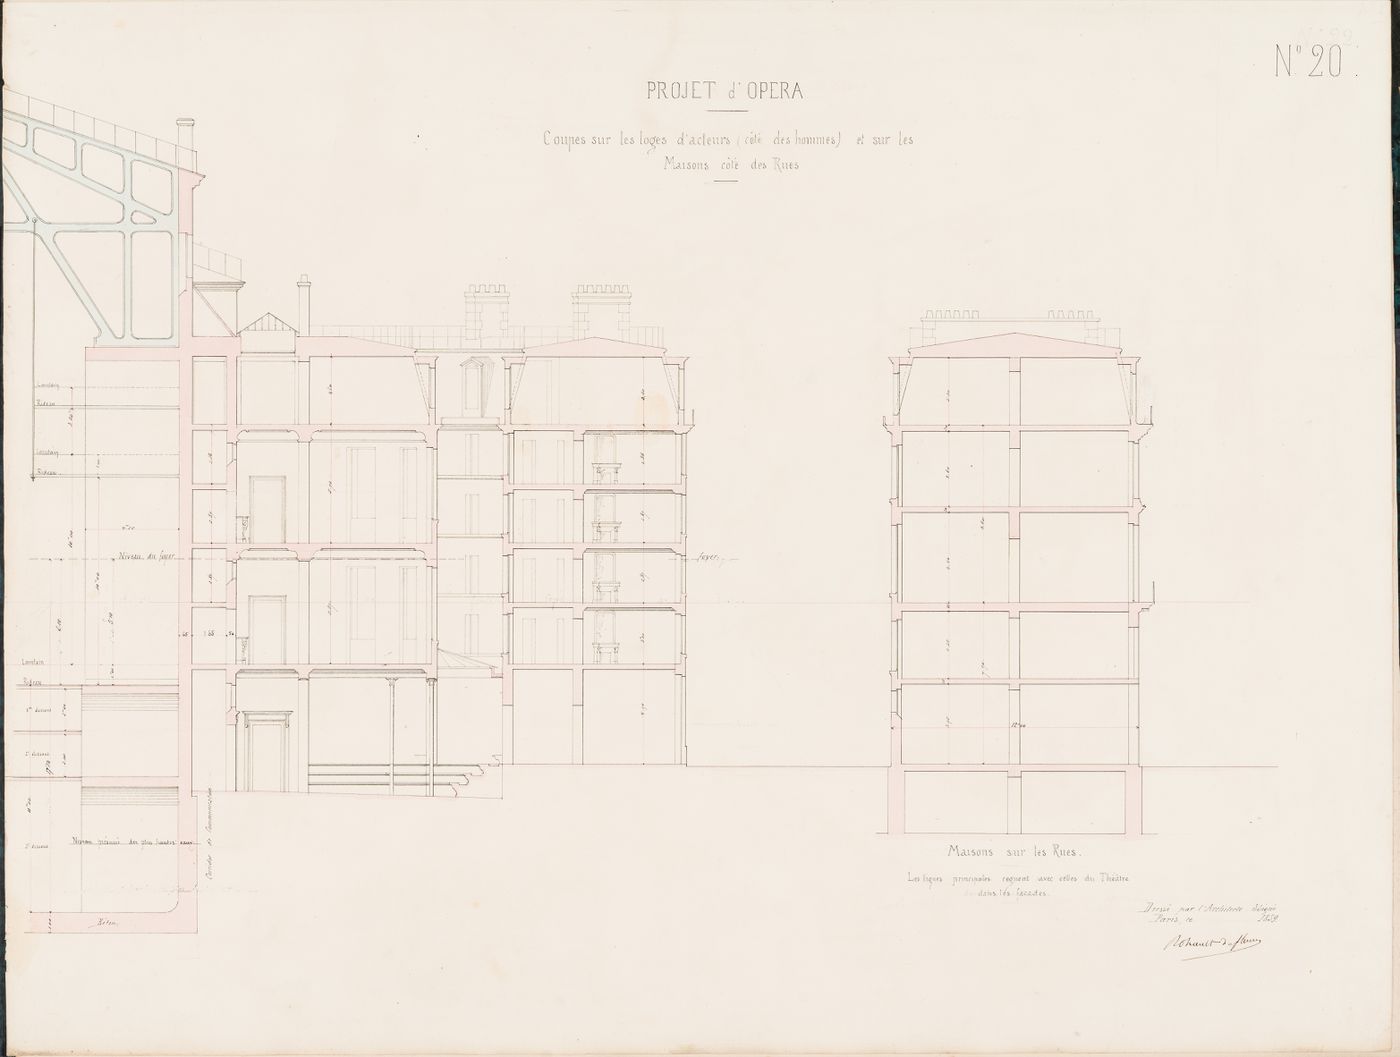 Project for an opera house for the Théâtre impérial de l'opéra: Cross section through the actors' dressing rooms and a house located on an adjacent street